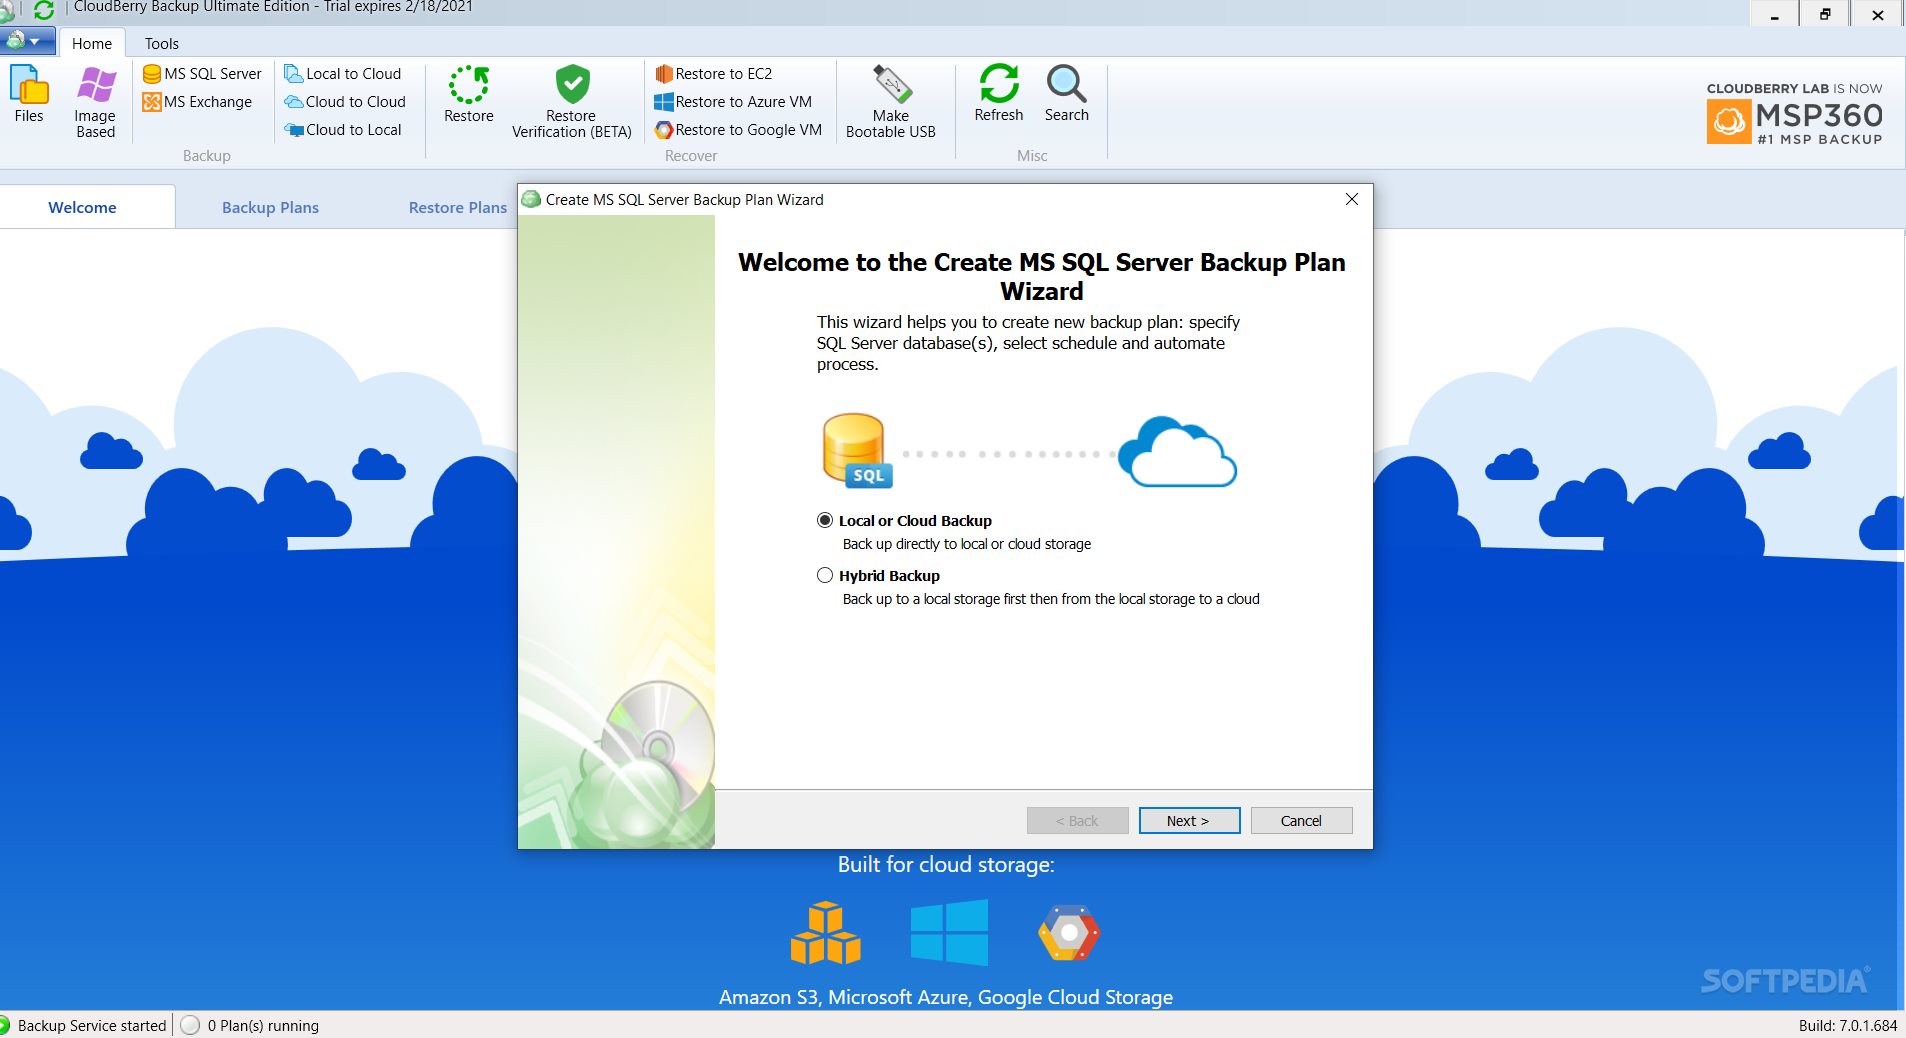 cloudberry backup ultimate license